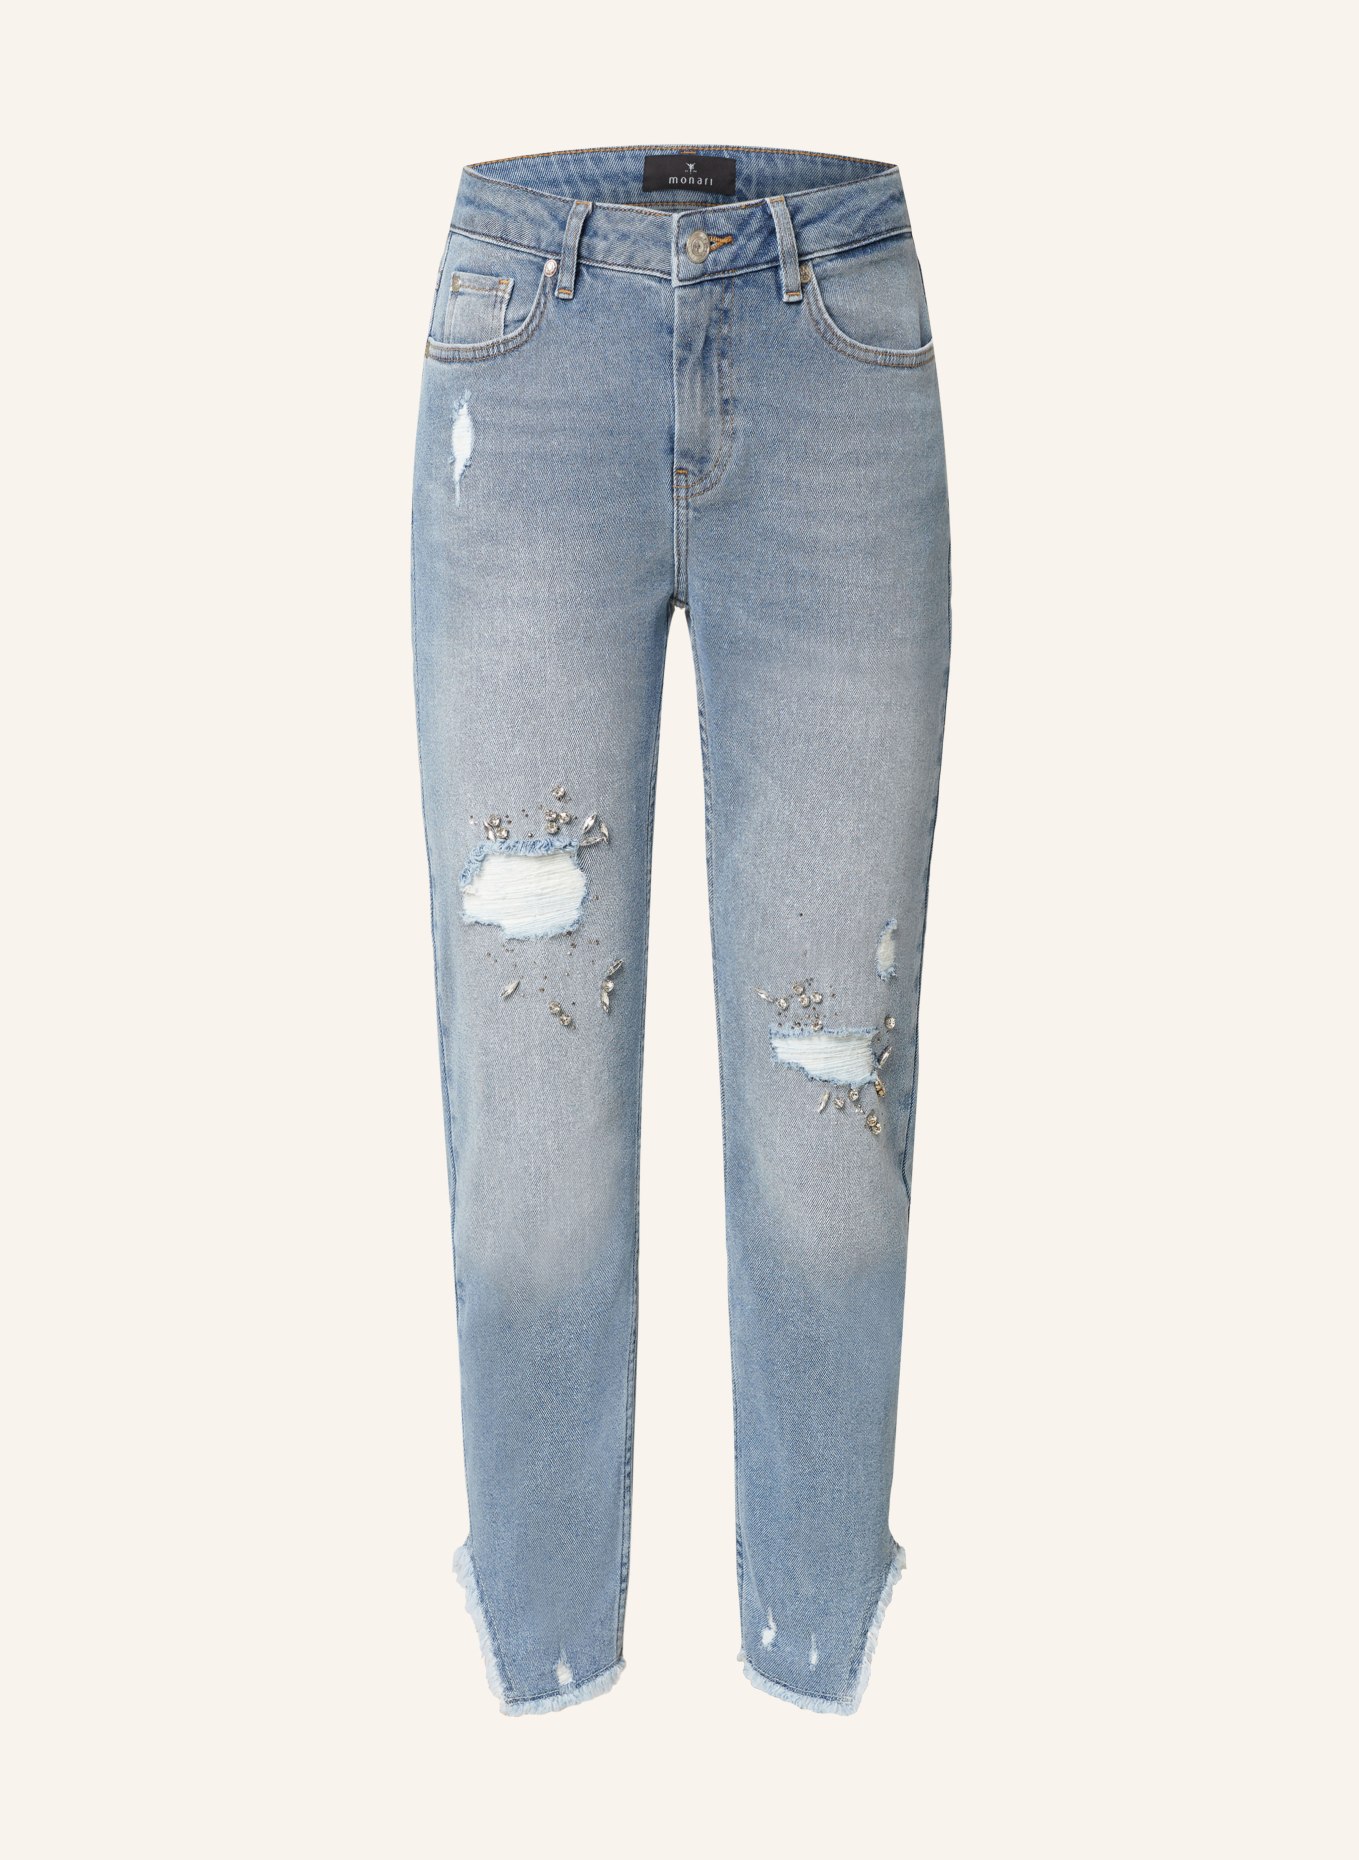 monari Skinny jeans with decorative gems, Color: 750 jeans (Image 1)